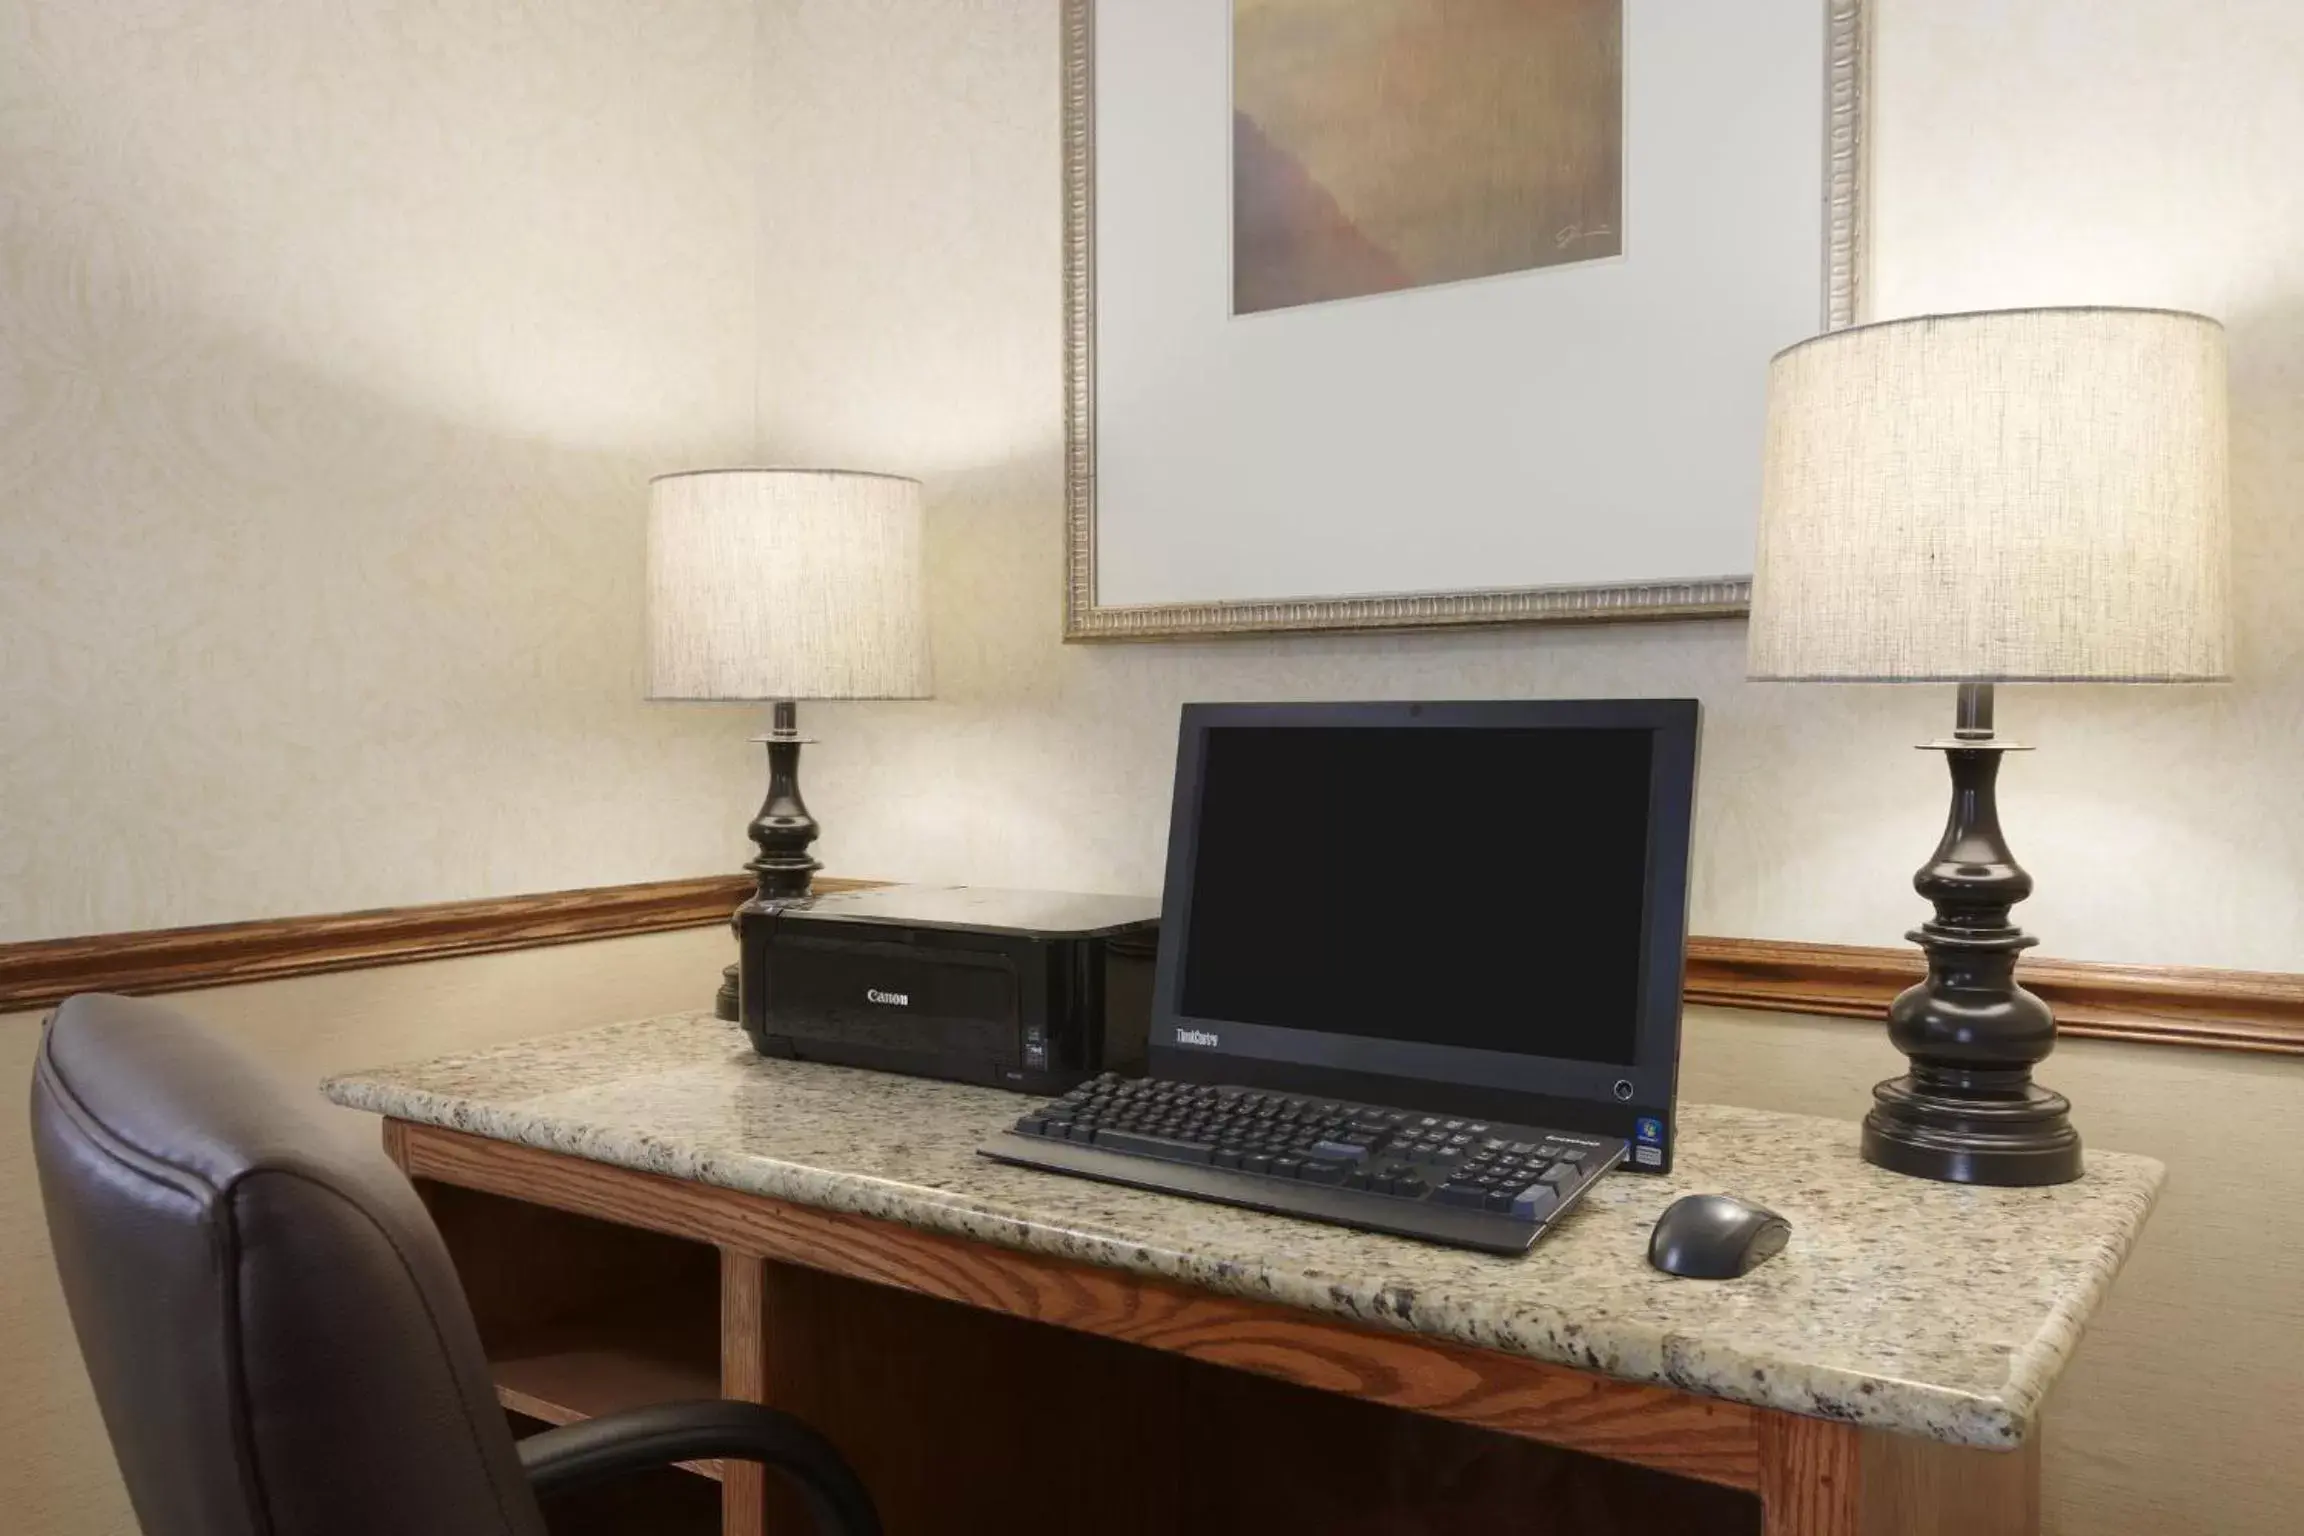 Business facilities in Country Inn & Suites by Radisson, Ashland - Hanover, VA